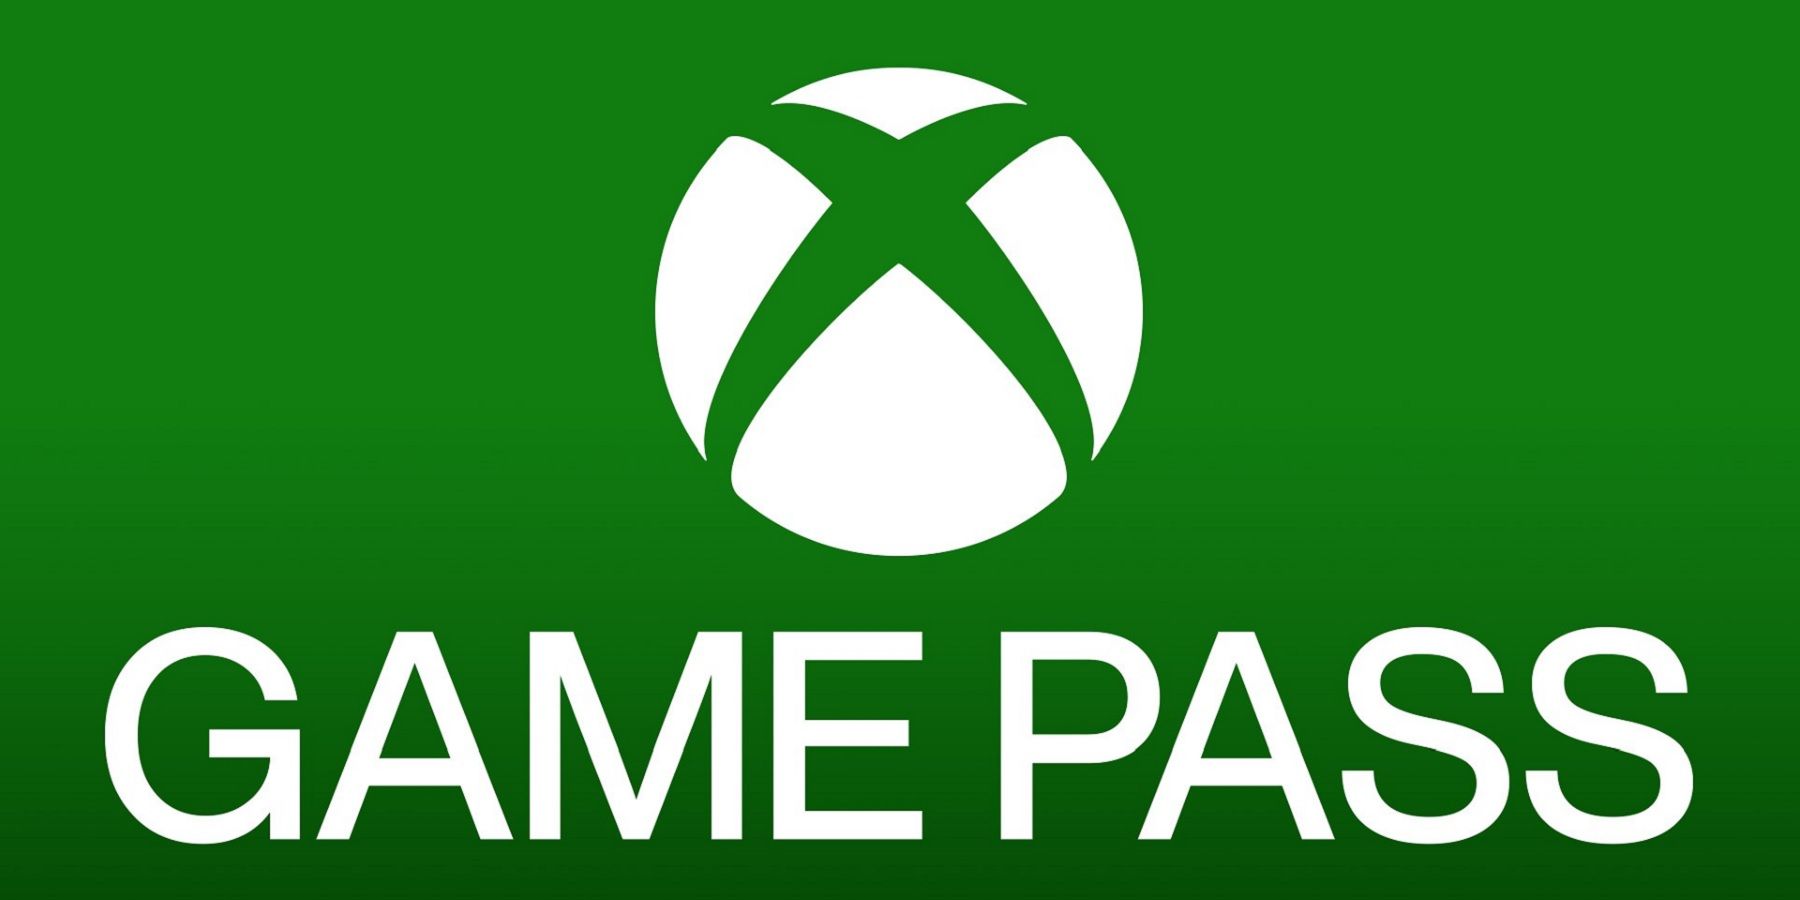 Xbox Game Pass Is Losing 5 More Games at the End of May 2023